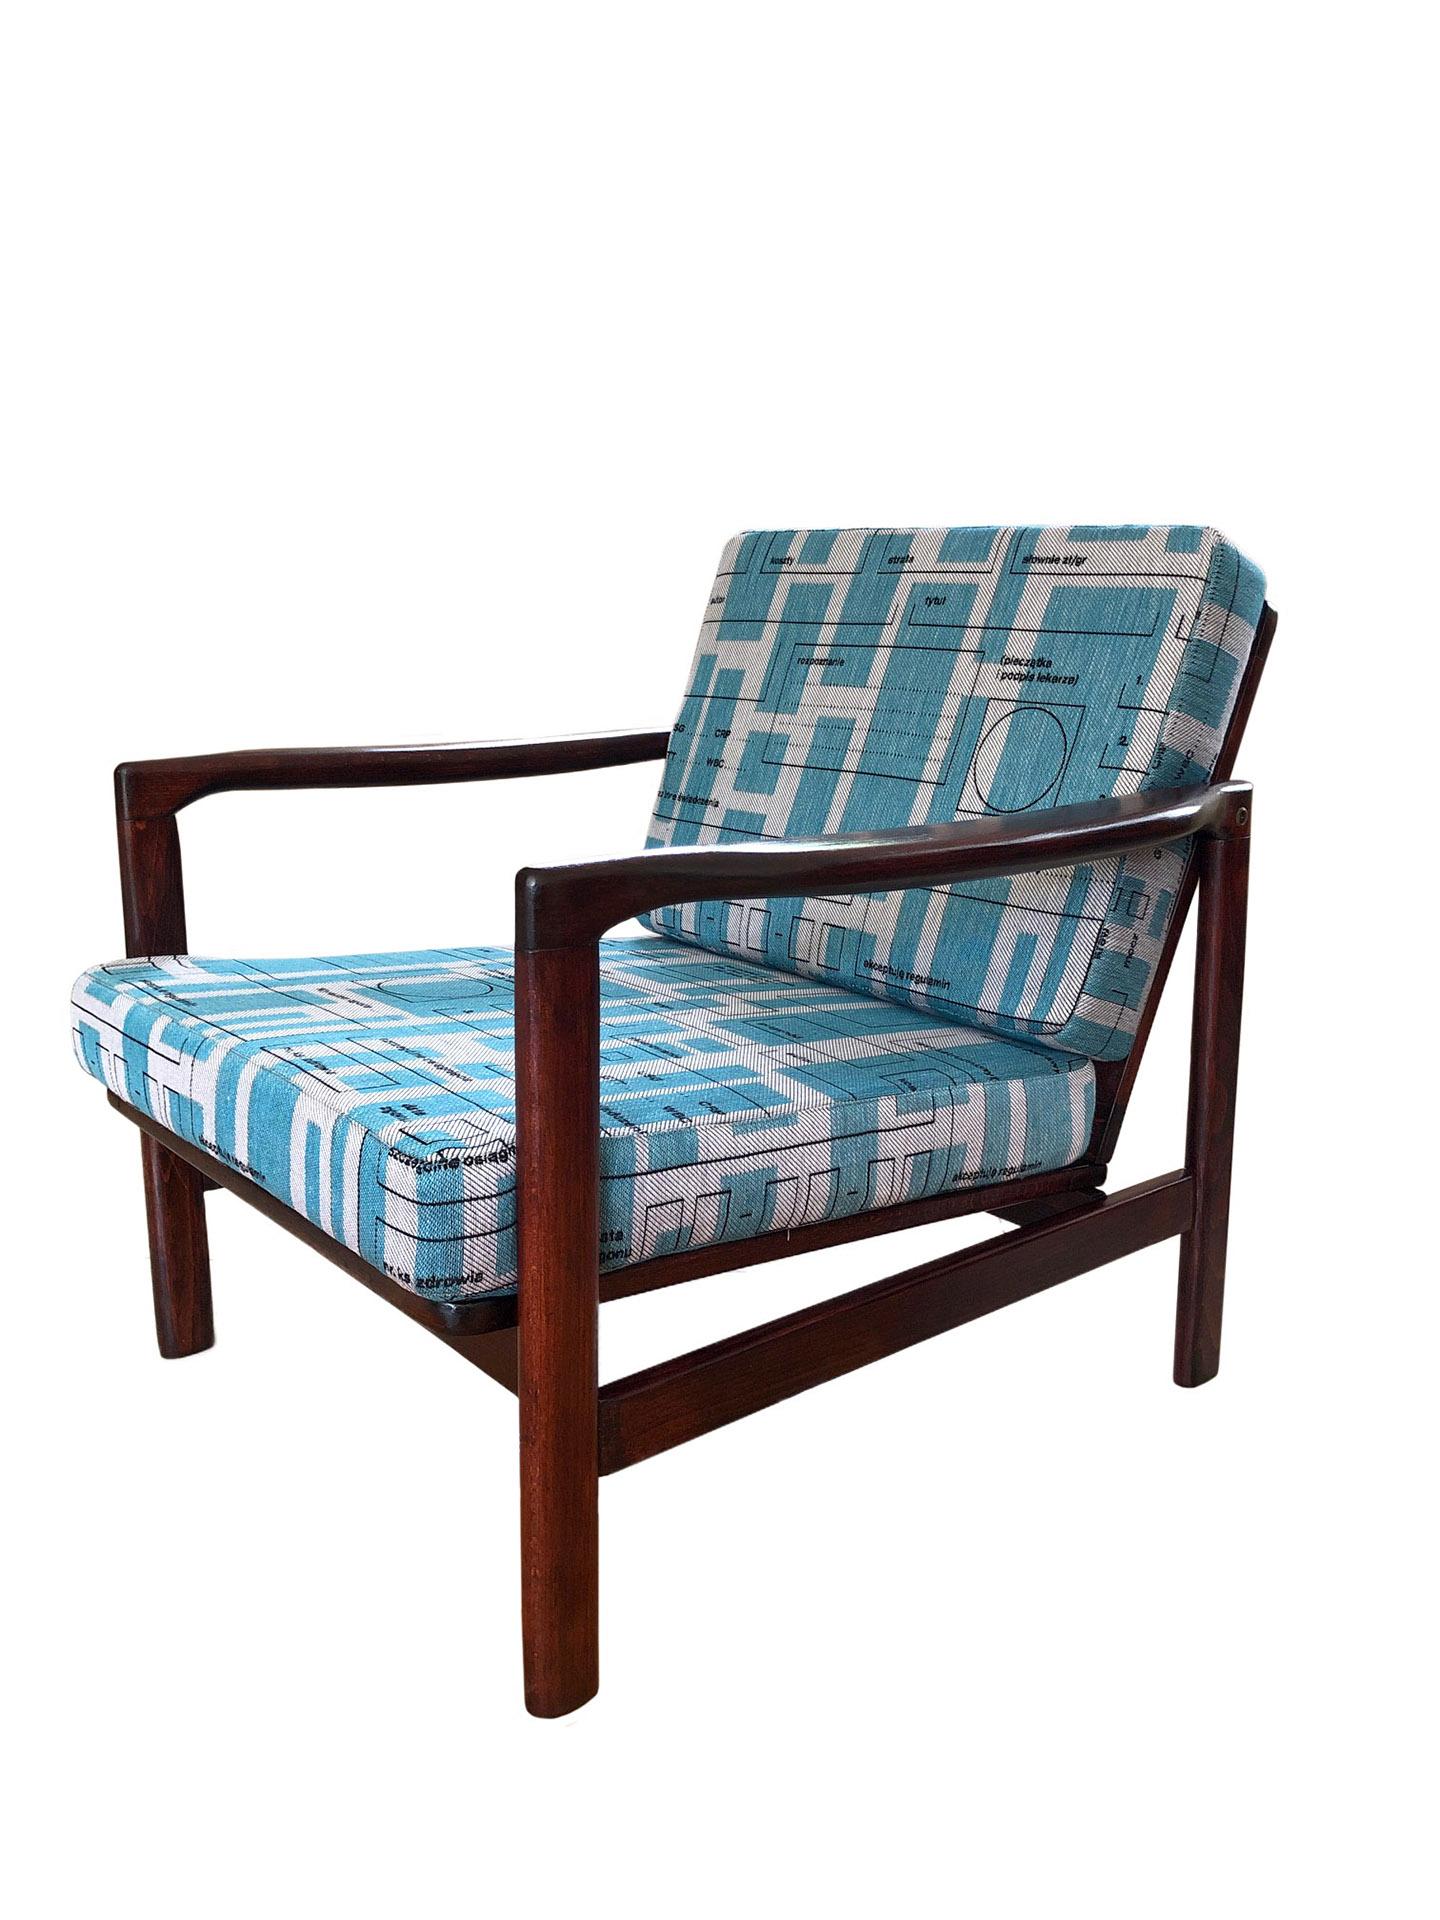 Hand-Crafted Pair of Blue Jacquard Mid-Century Armchairs by Zenon Bączyk, 1960s For Sale